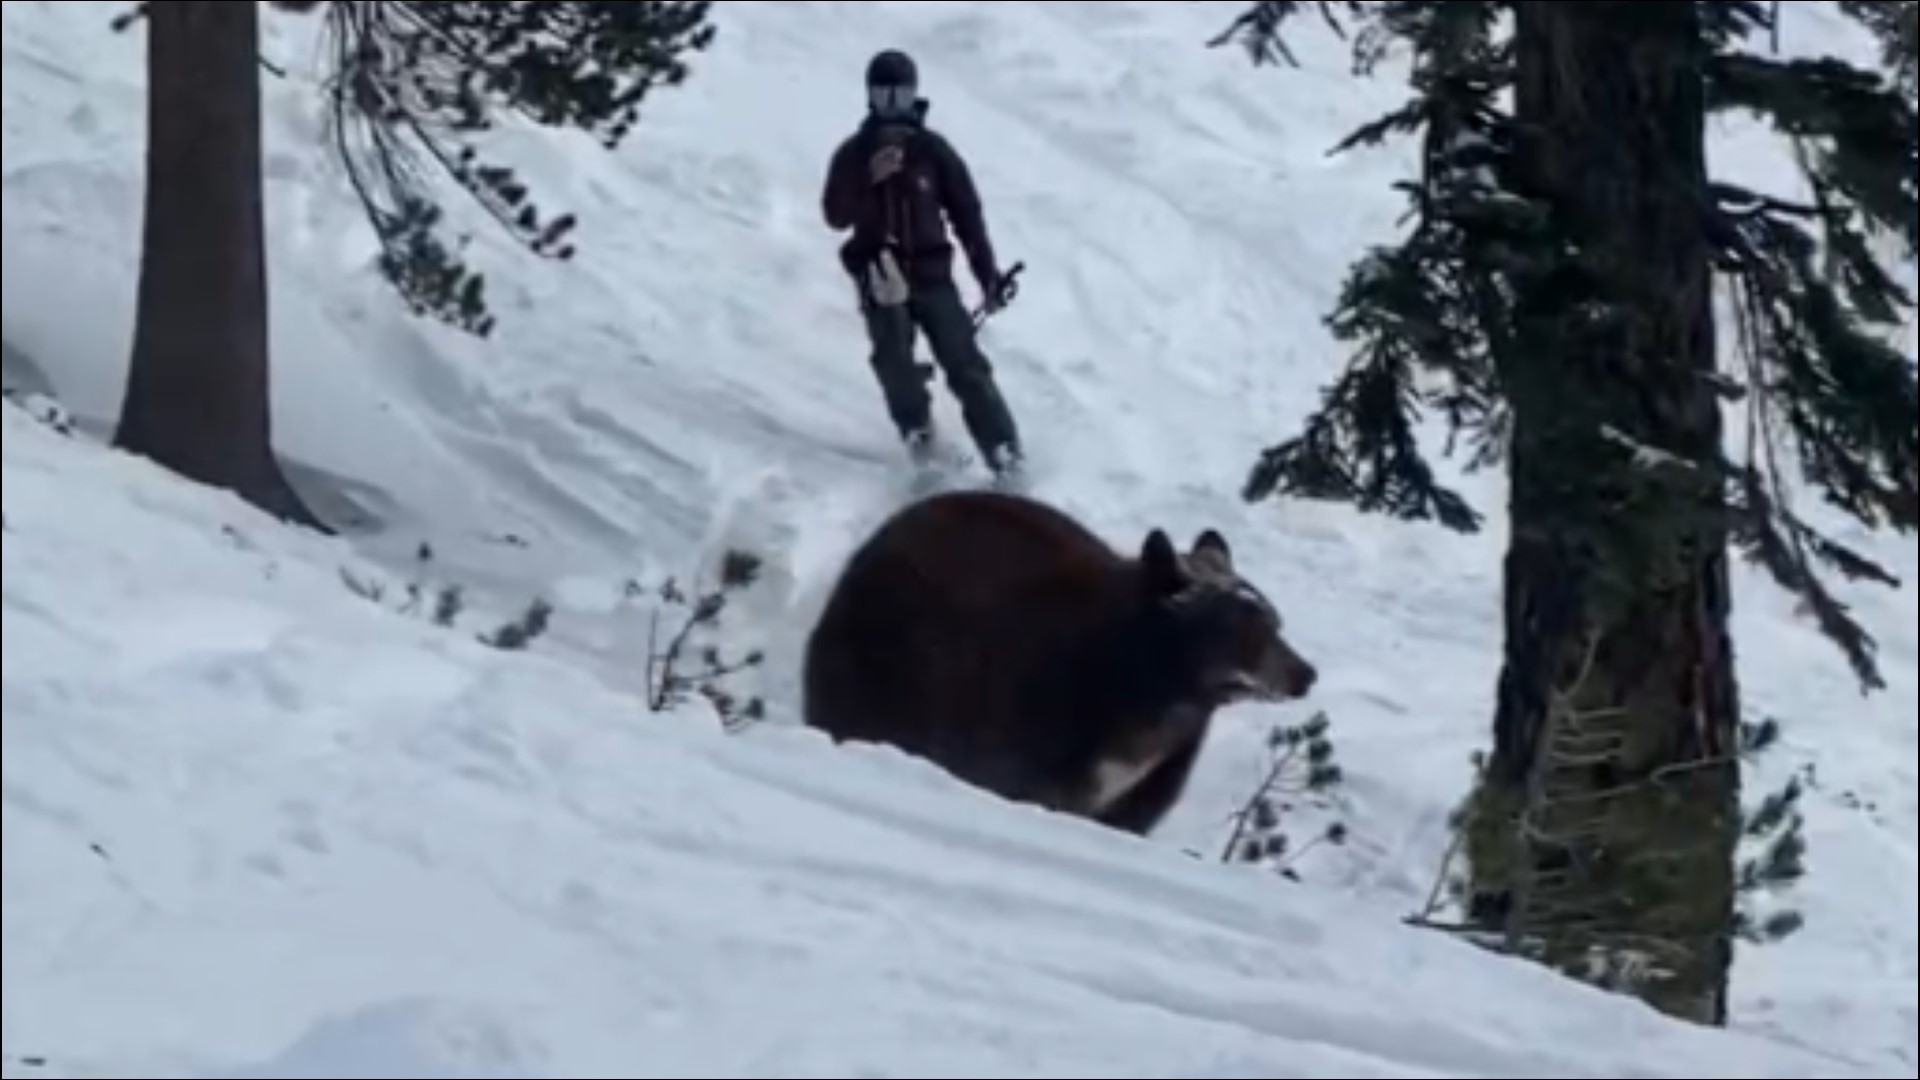 In a statement, Heavenly asked skiers and snowboarders to respect a bear's space if seen.